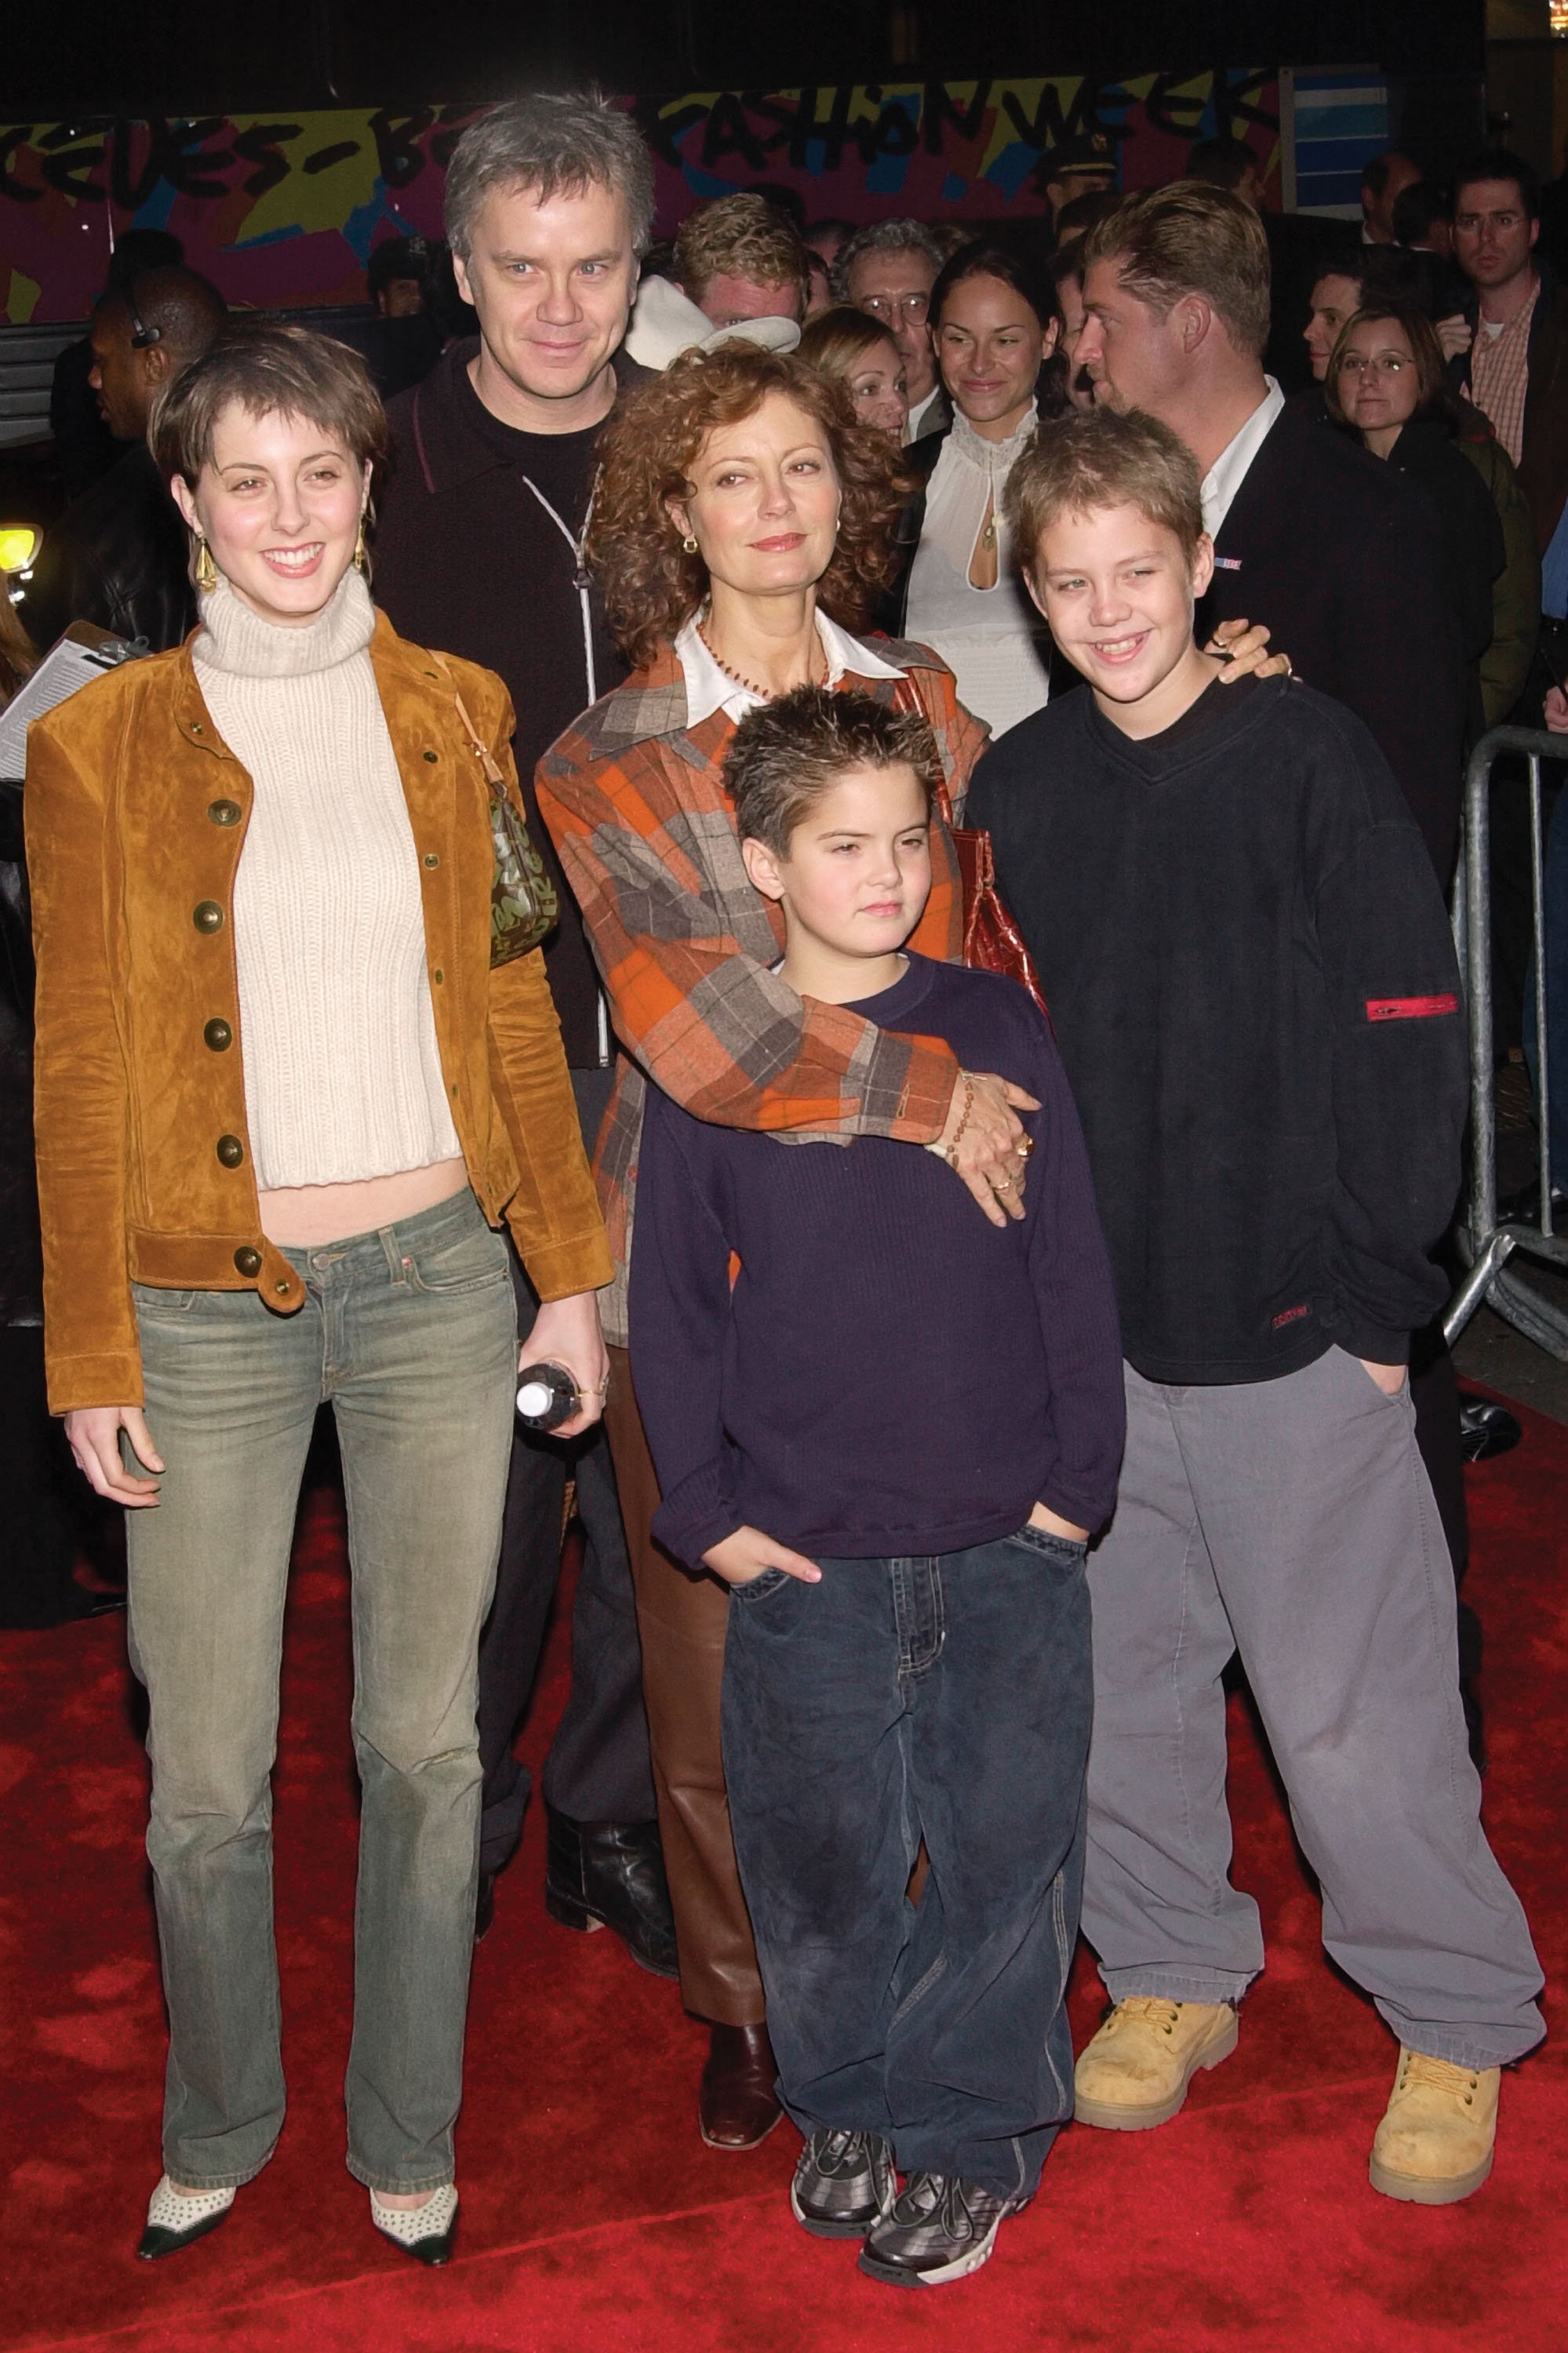 Susan Sarandon and Tim Robbins with their children Miles, Jack and Eva. | Source: Getty Images